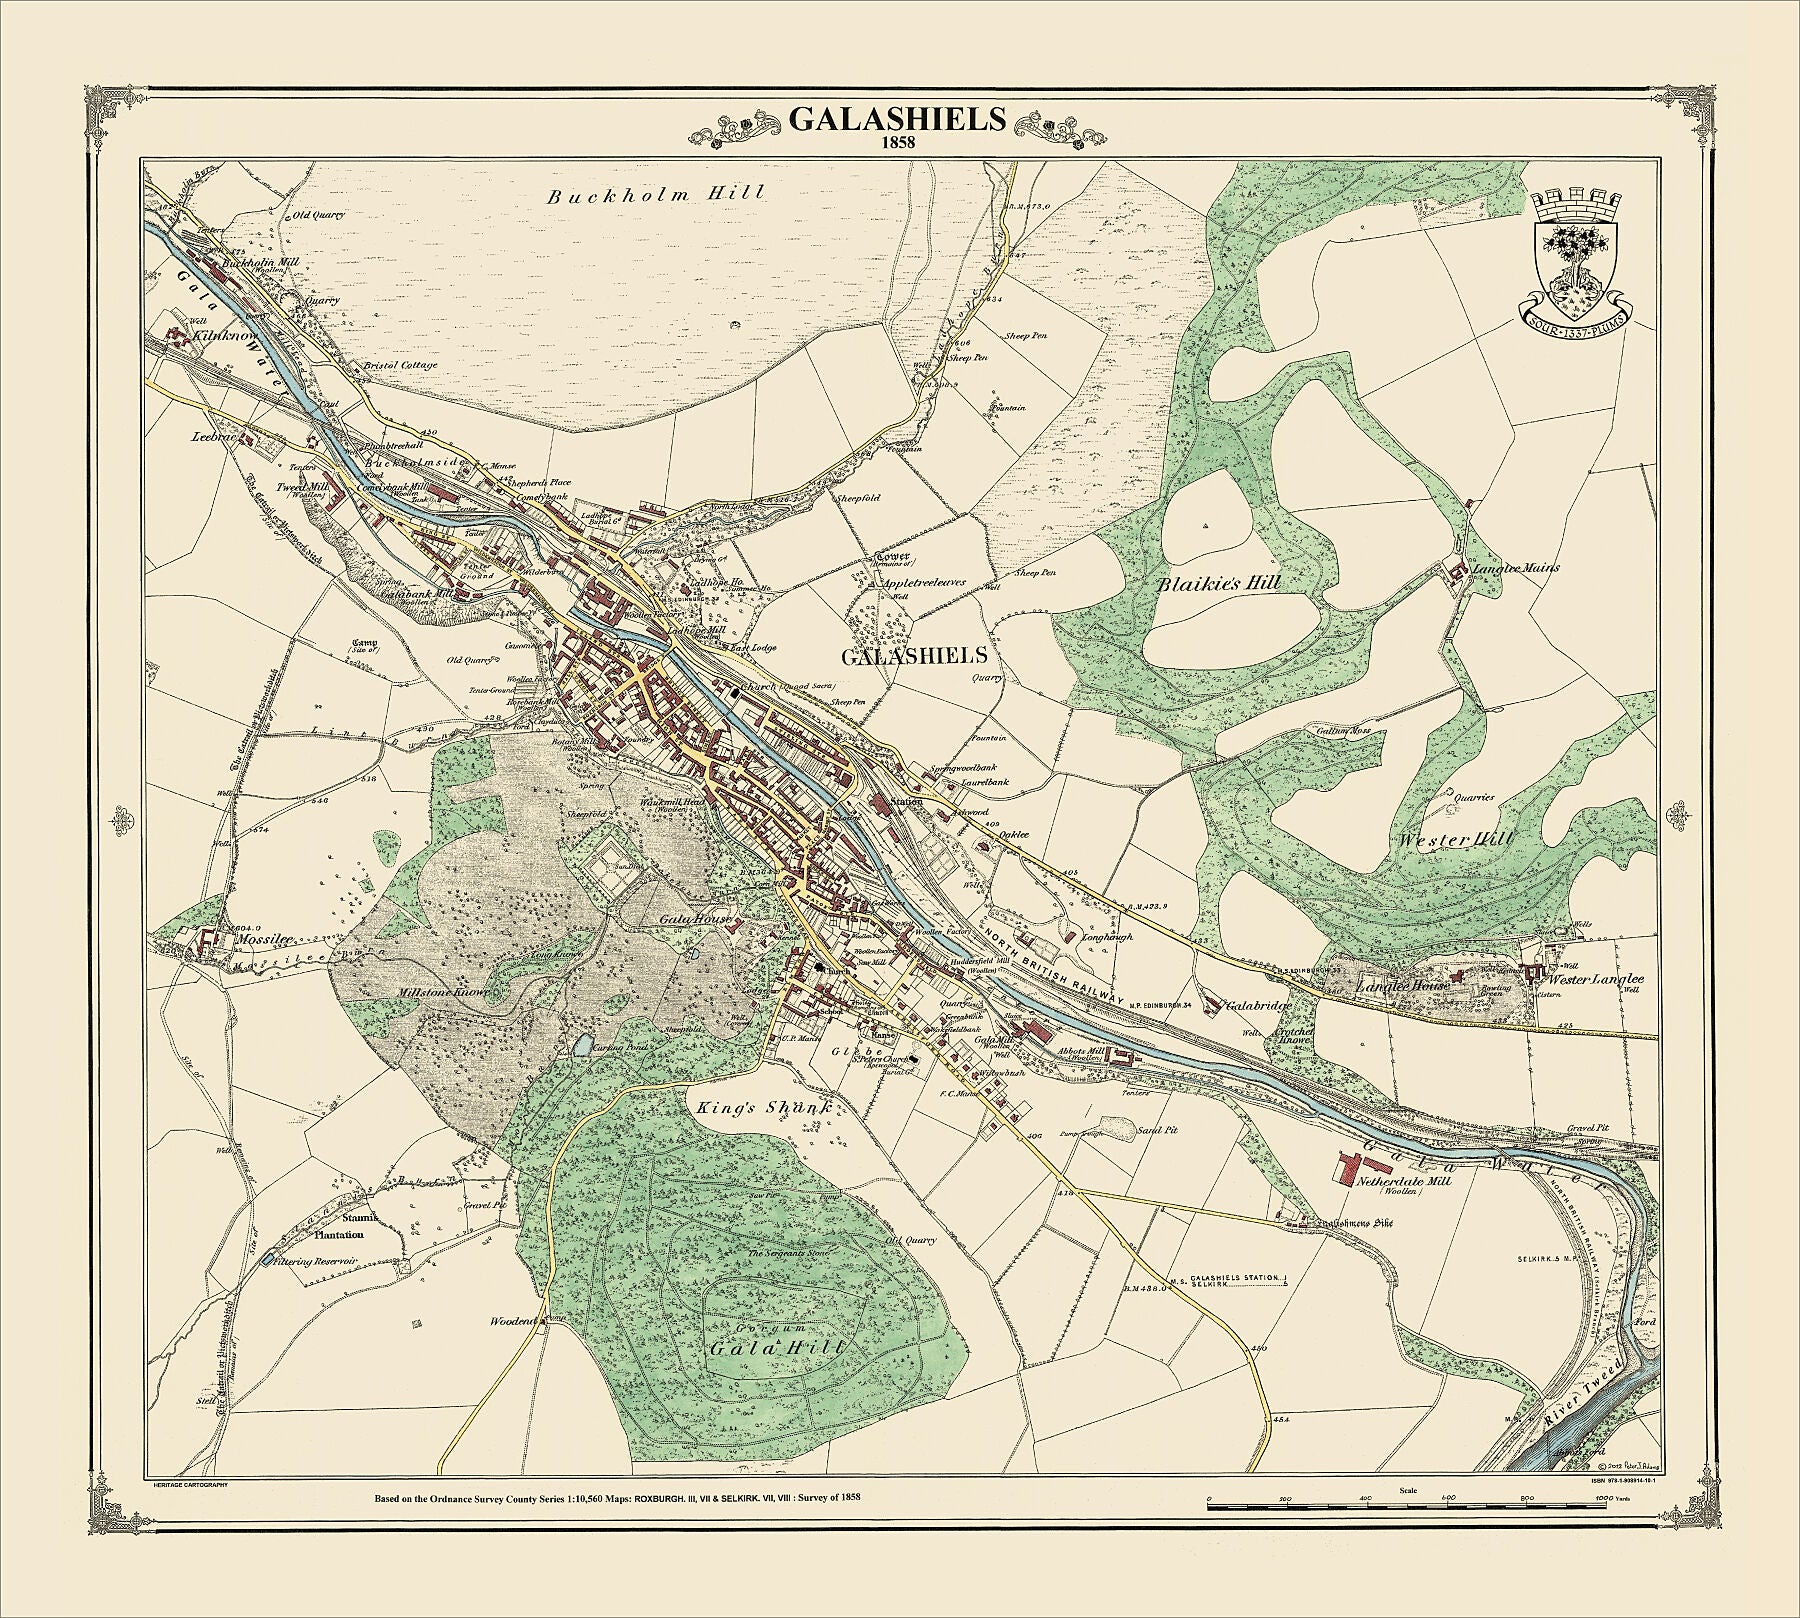 Coloured Victorian map of Galashiels in 1858 by Peter J Adams of Heritage Cartography